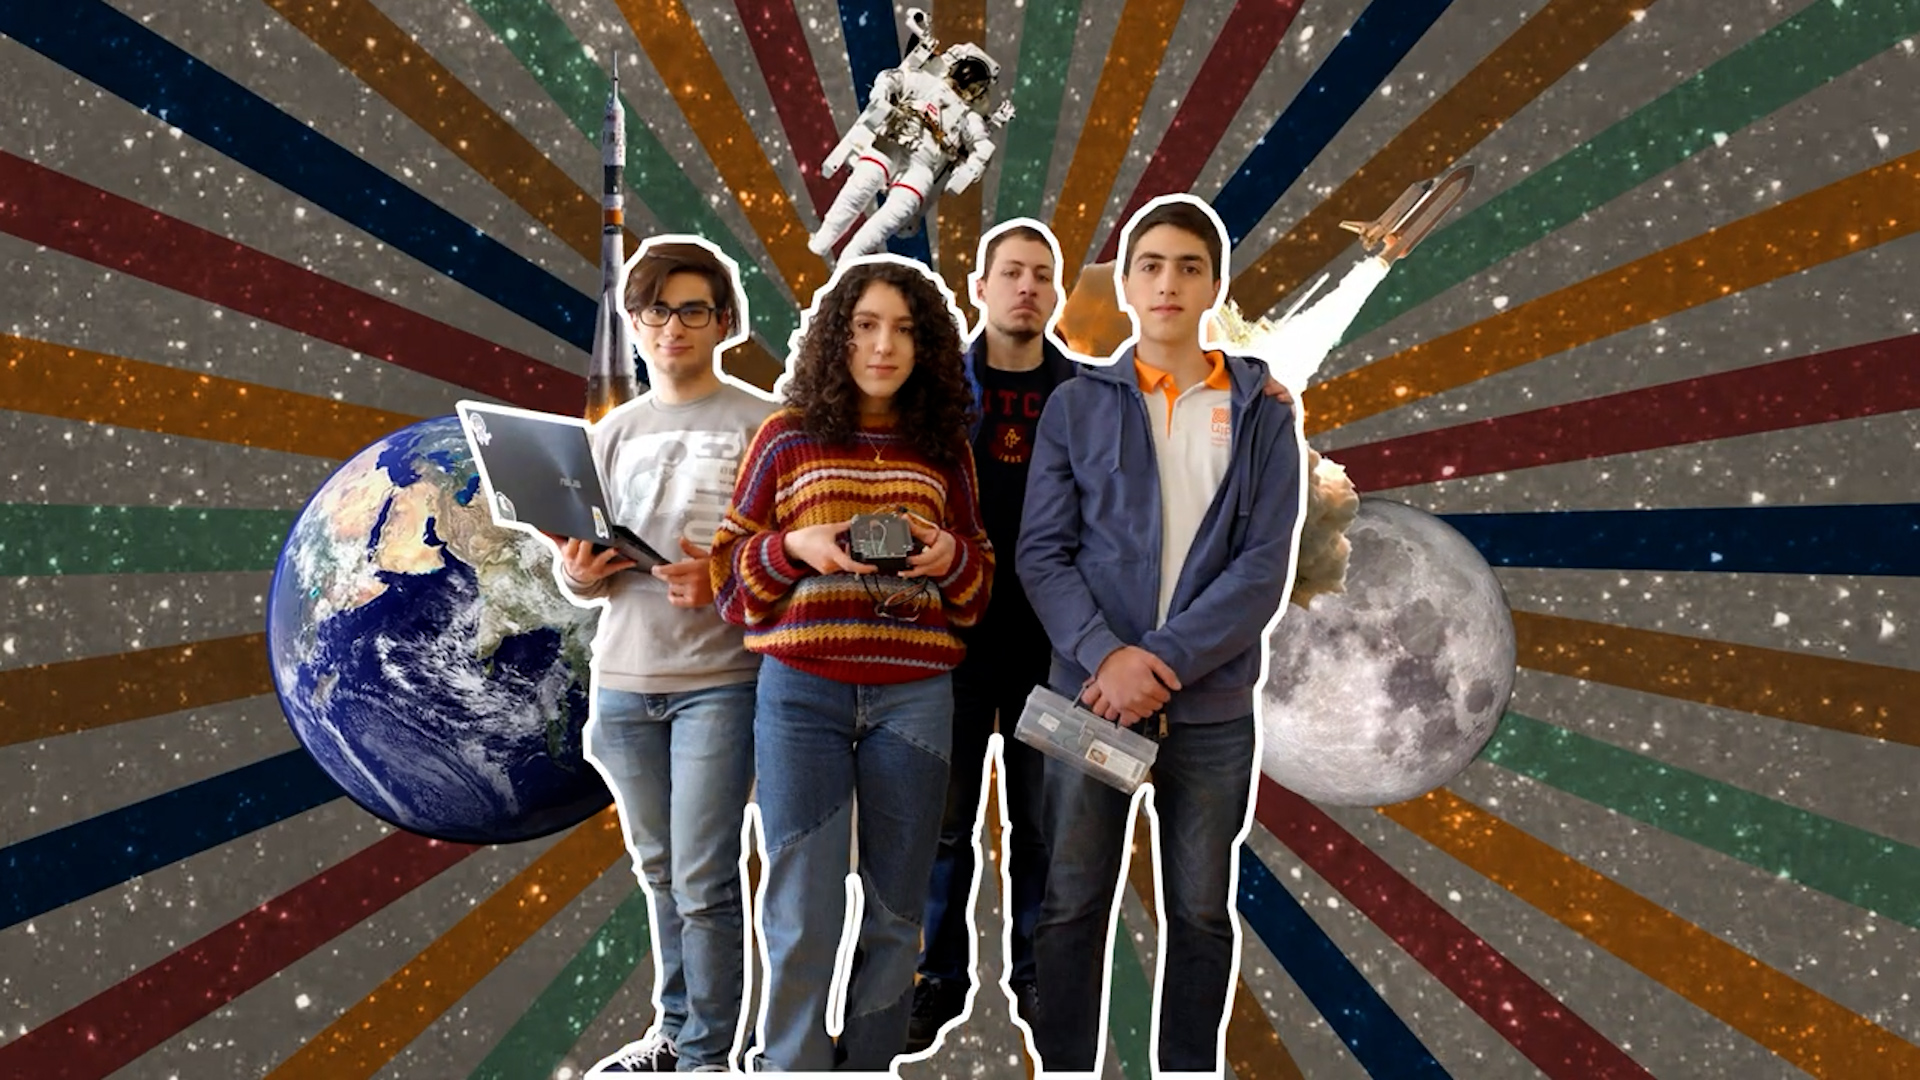 Yerevan students win chance to send device into space